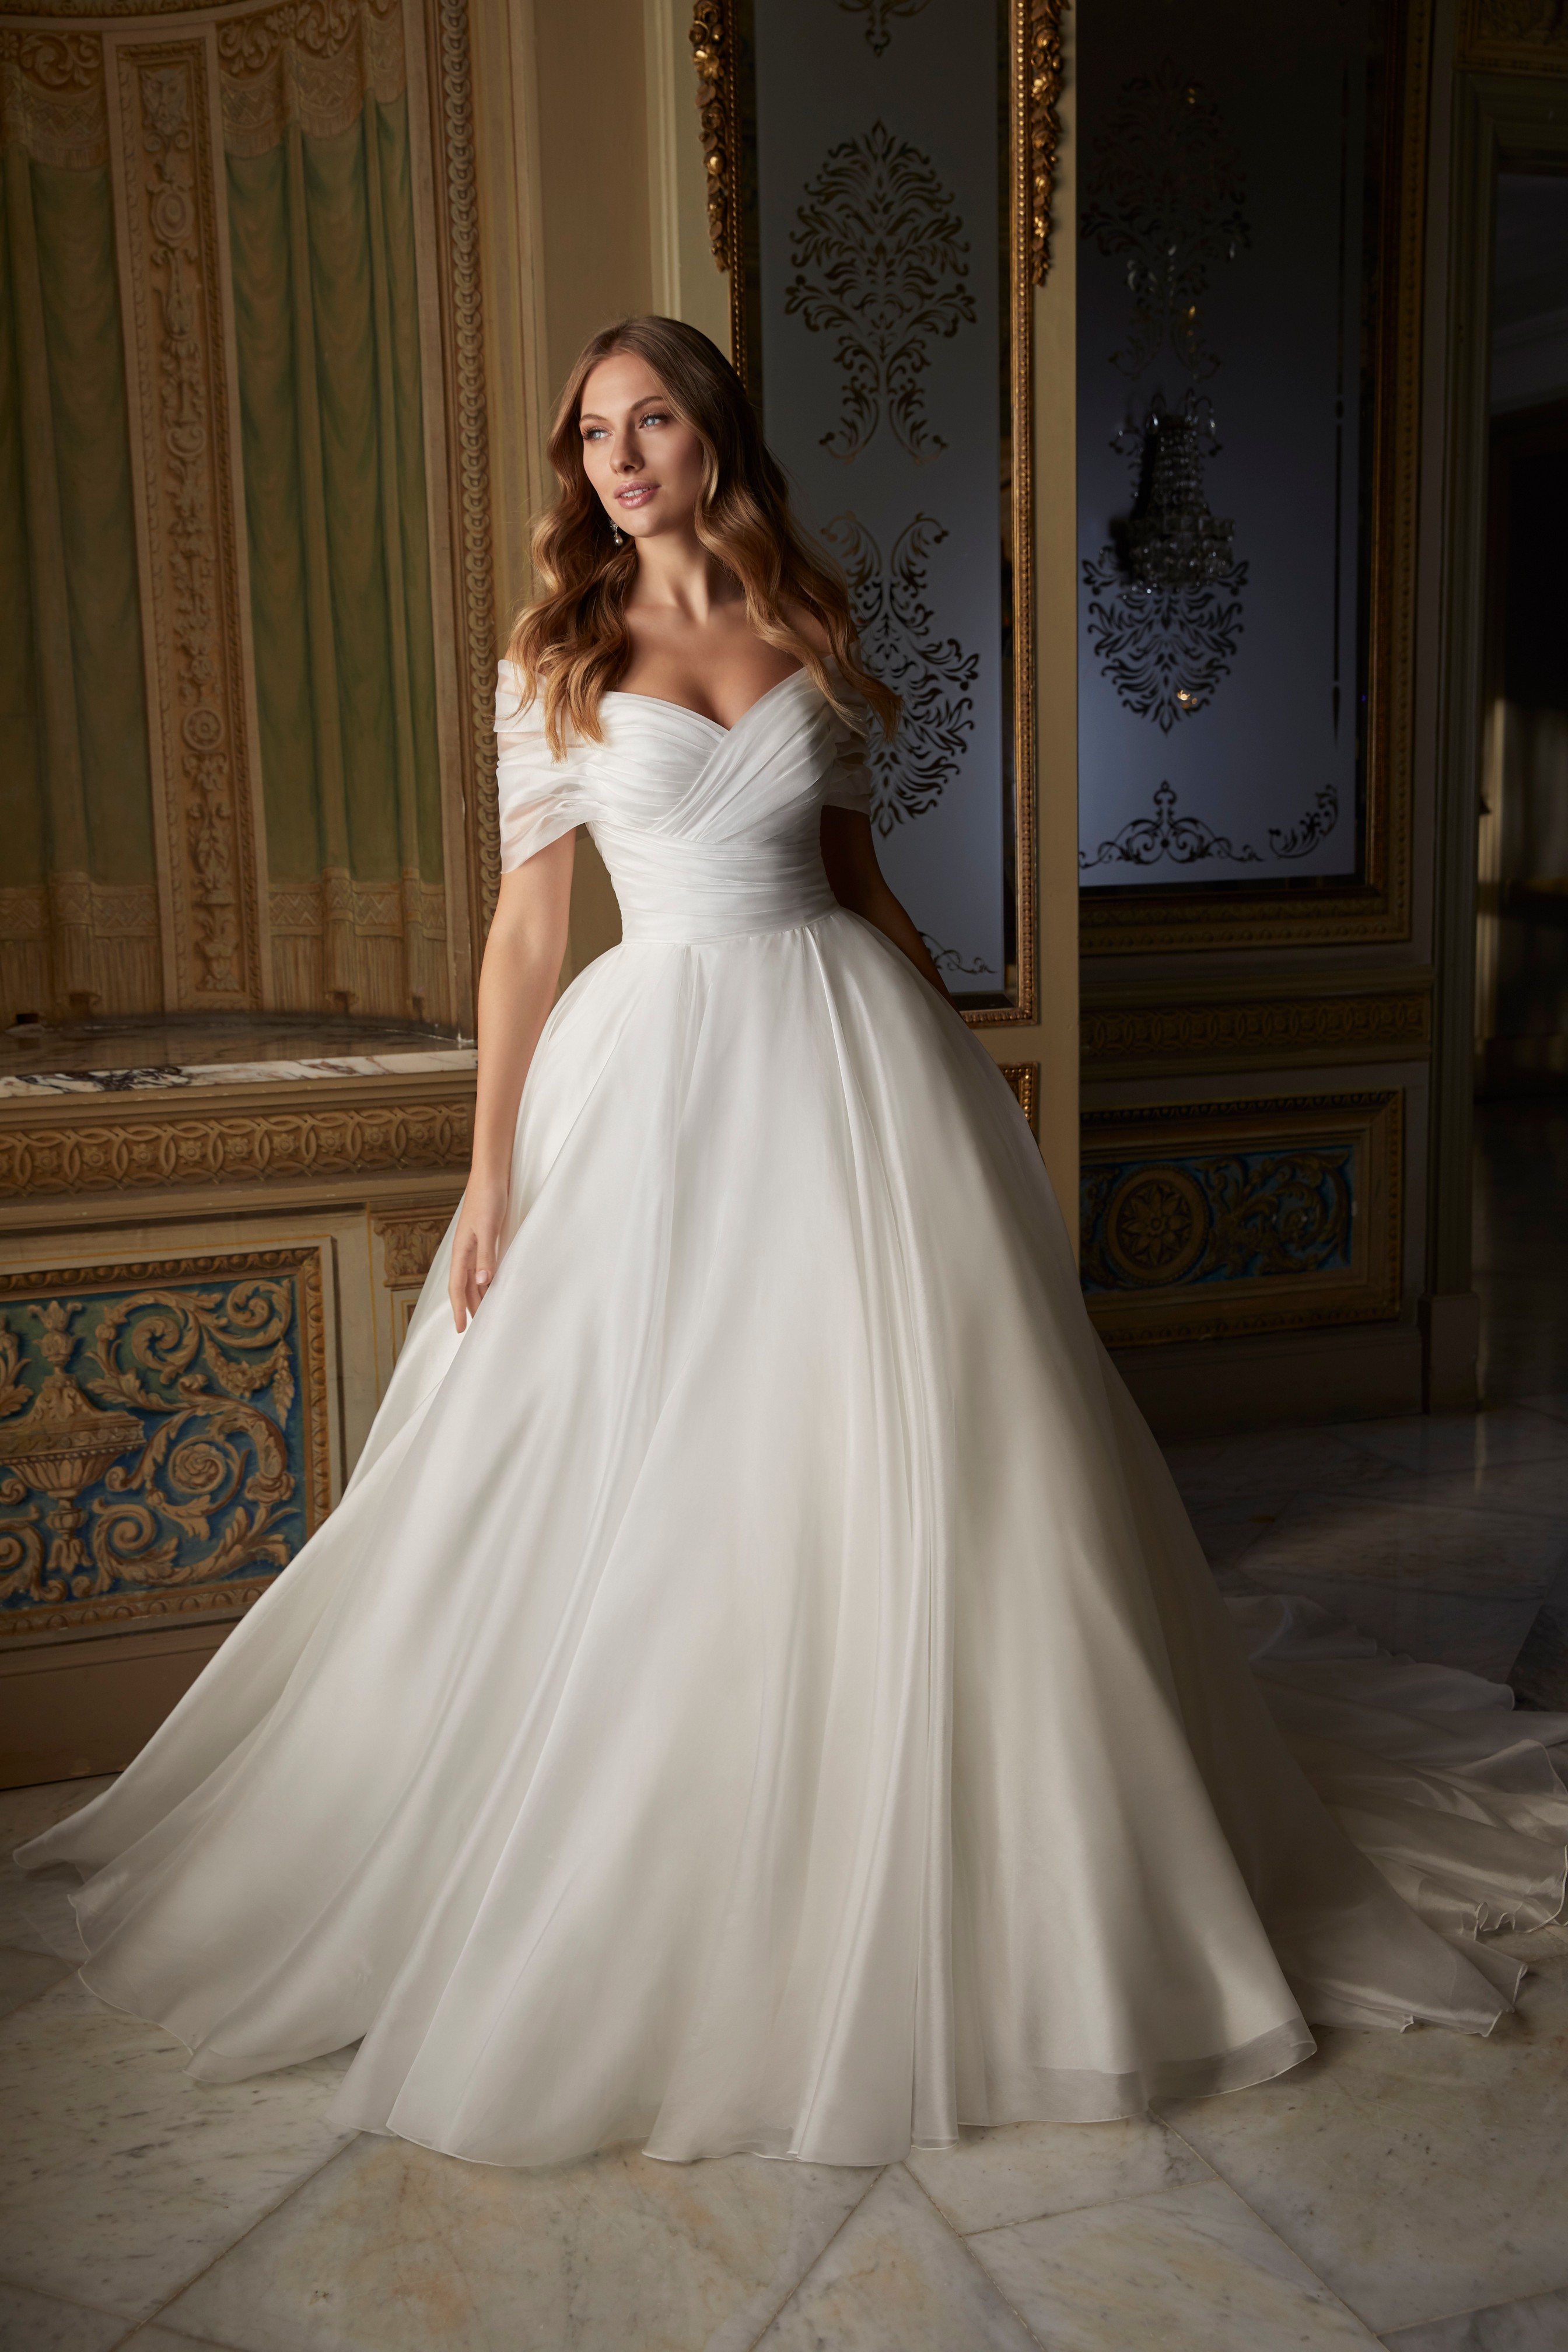 Model stood in a grand building wearing Ronald Joyce style 69551, an elegant plain ballgown wedding dress with off the shoulder sleeves 